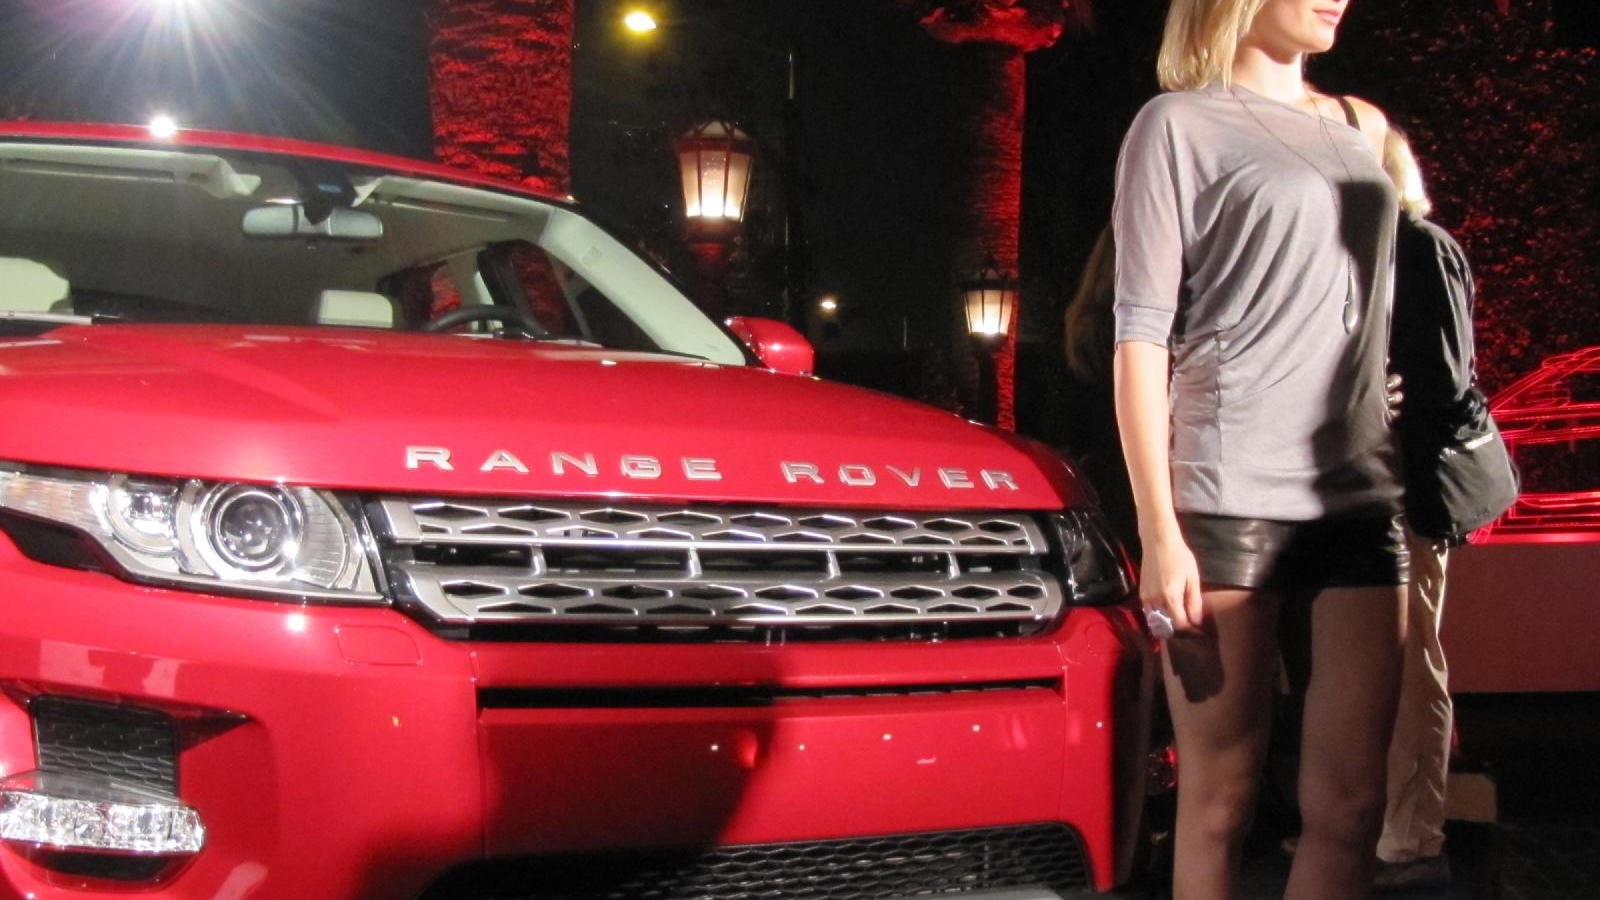 2012 Range Rover Evoque launch party, Ceconni restaurant, West Hollywood, California, November 2010